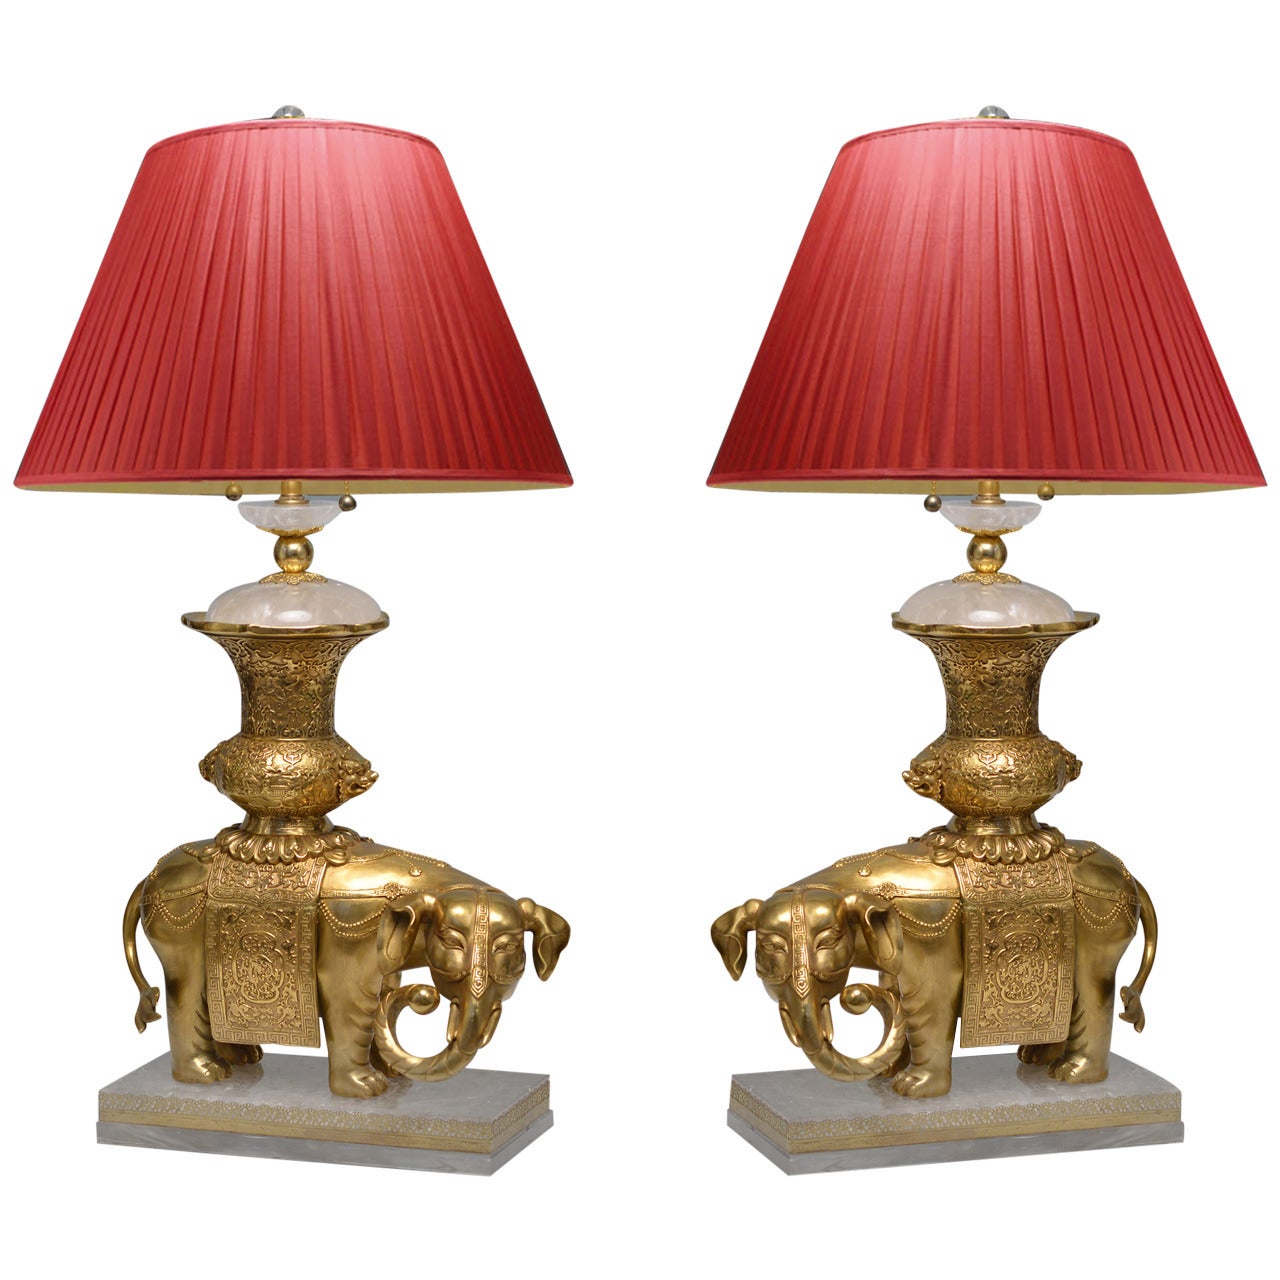 Pair of Gilt Bronze Figures of the Elephants Mounted as Lamps